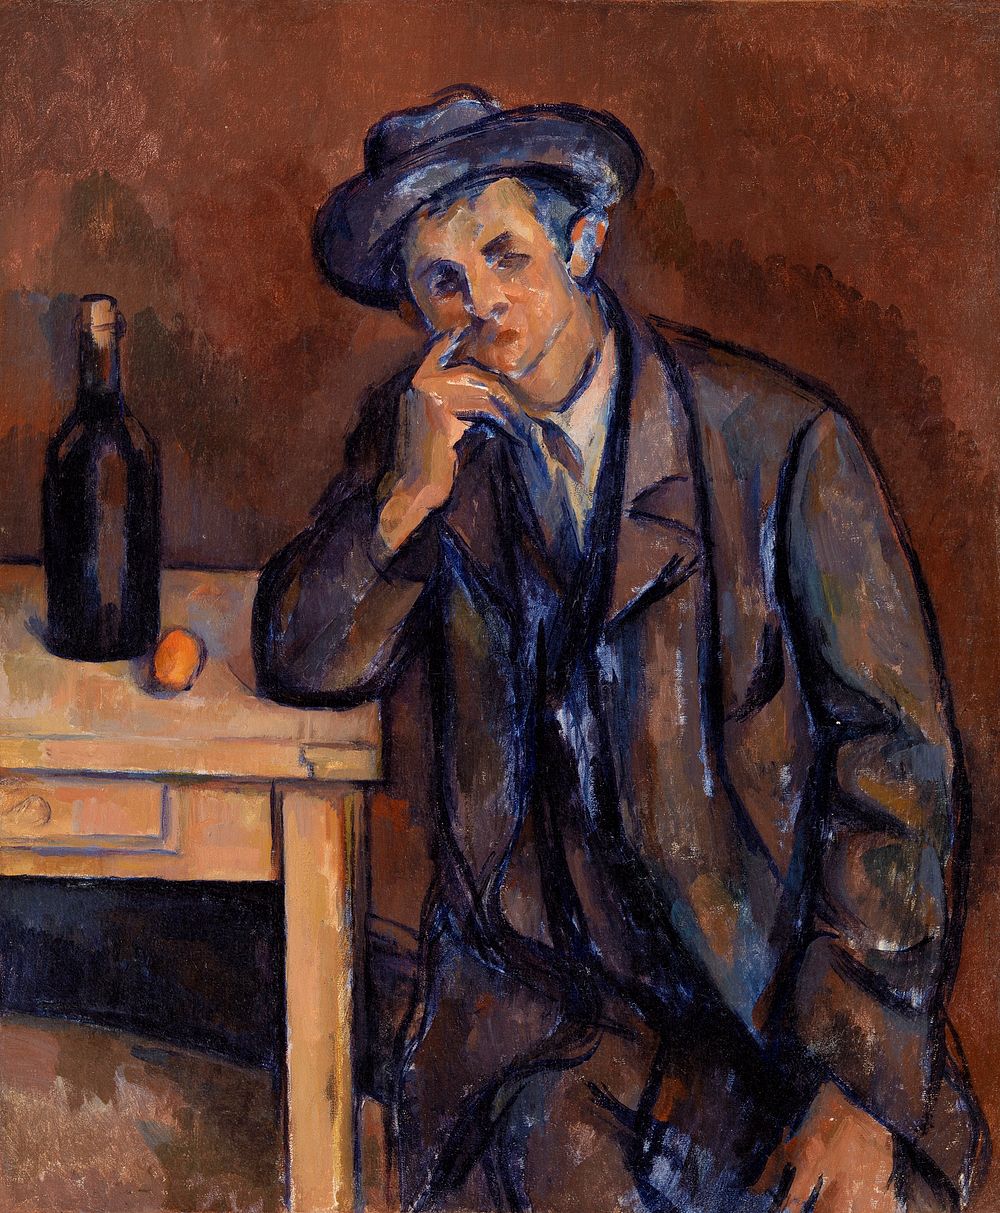 The Drinker (Le Buveur) (ca. 1898&ndash;1900) by Paul C&eacute;zanne. Original from Original from Barnes Foundation.…